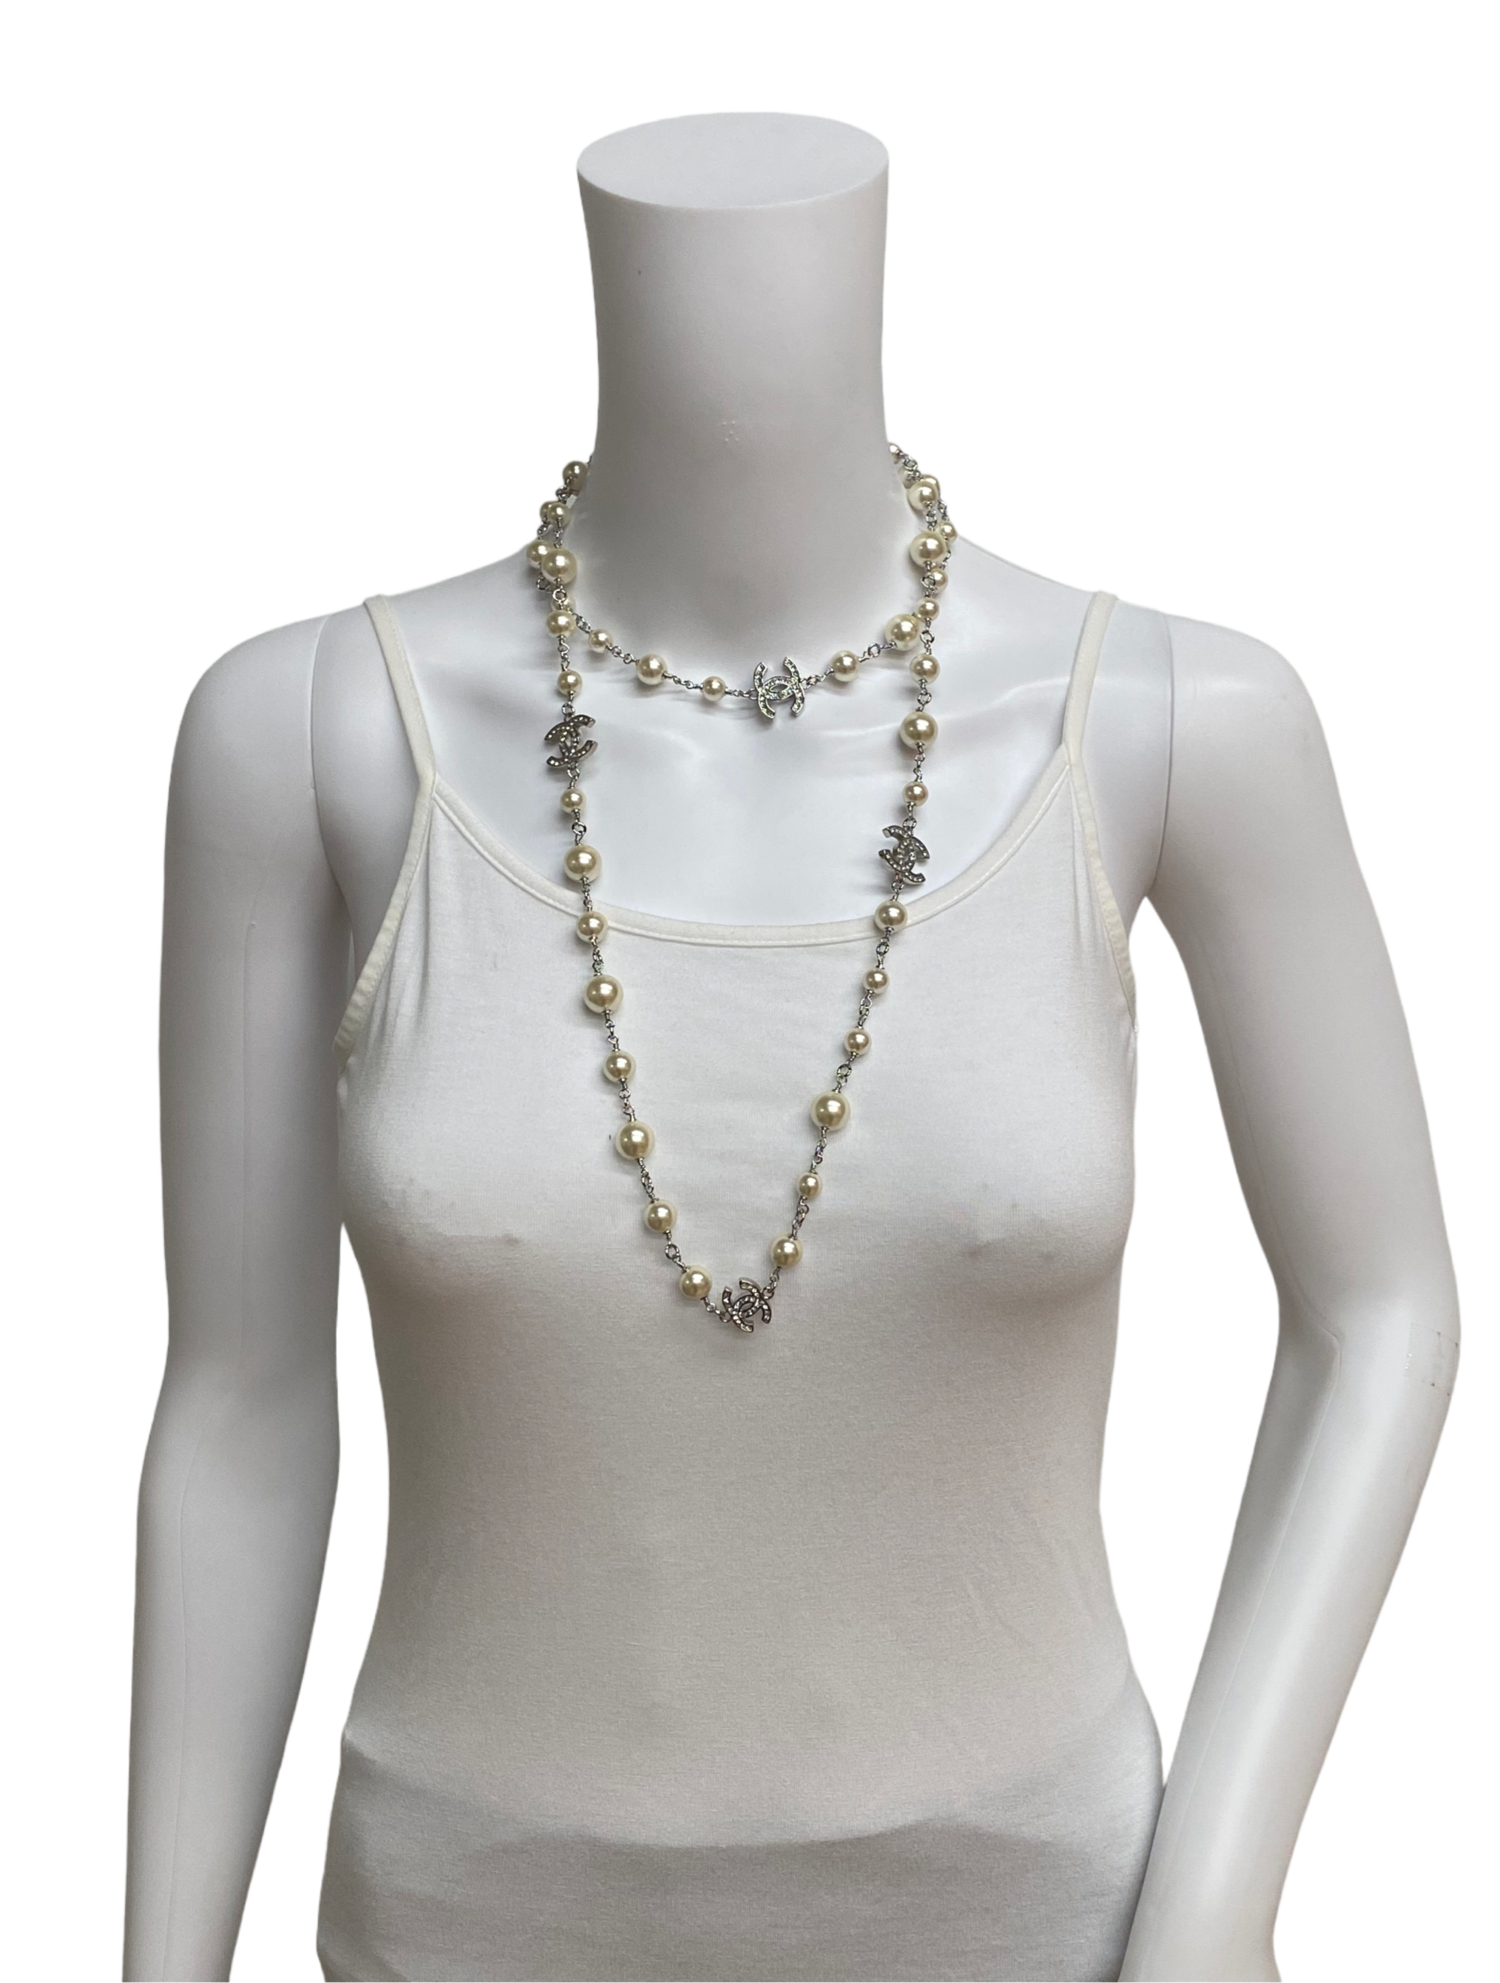 authentic chanel necklace pearl